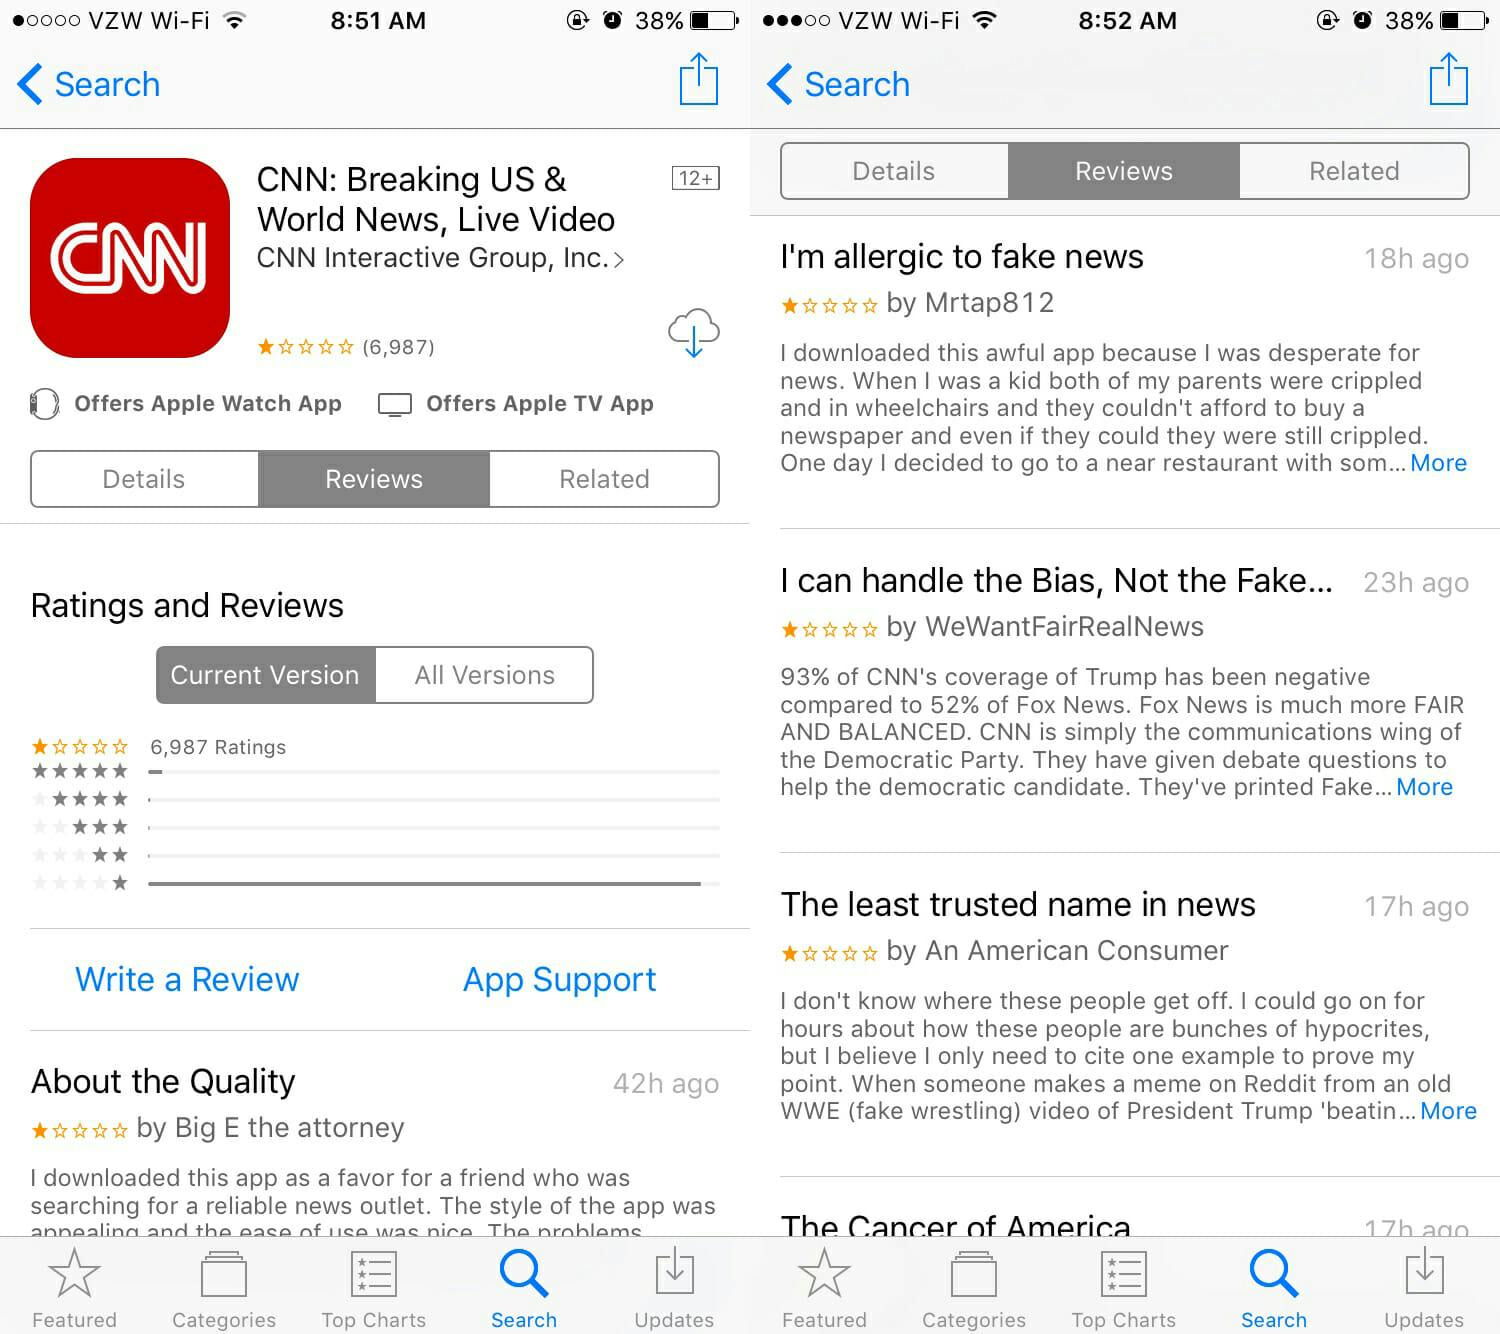 CNN is getting tons of one-star reviews